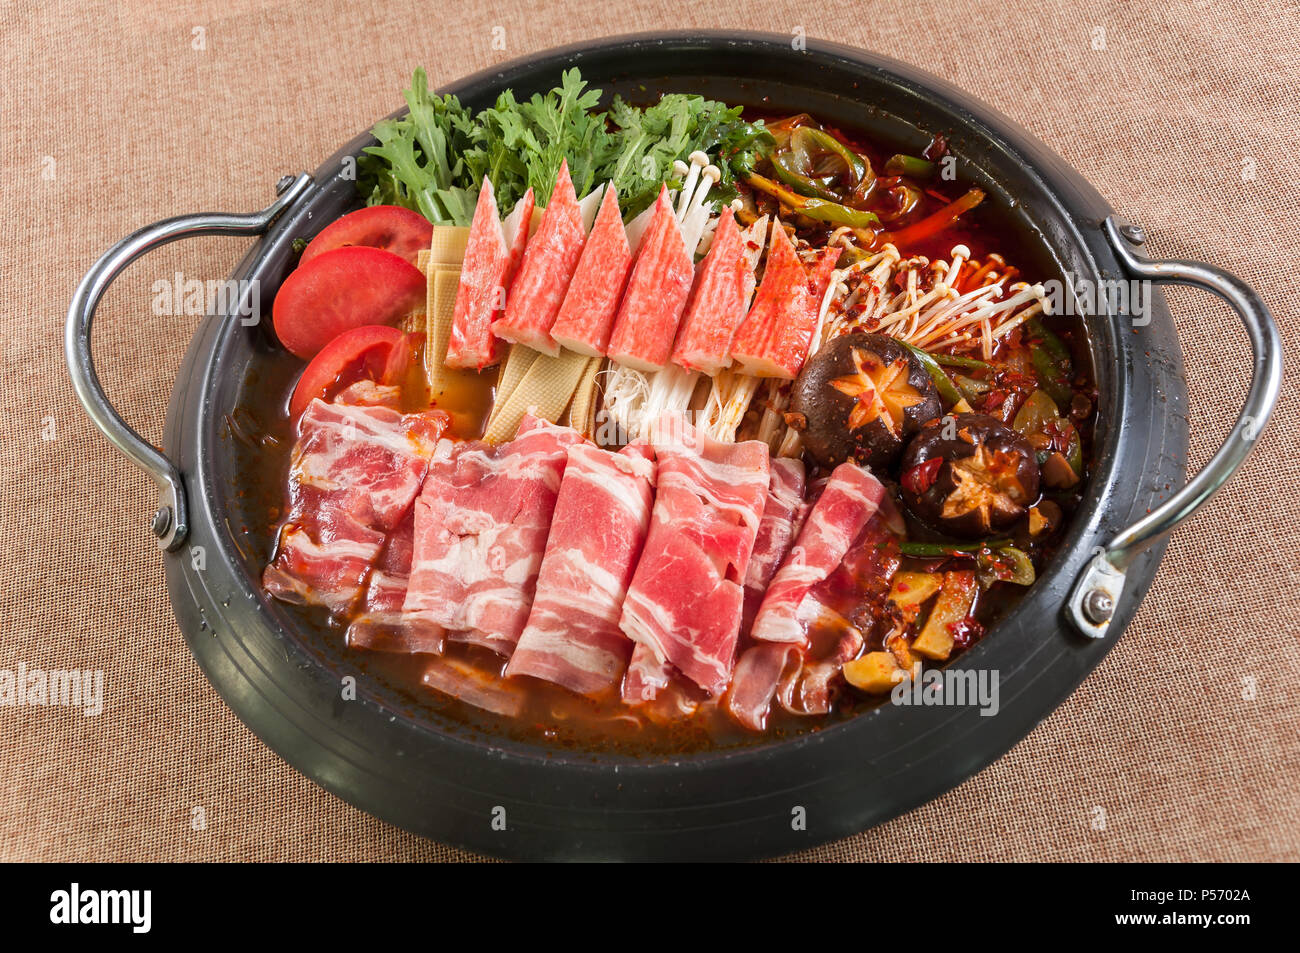 Korean Hot Pot Stock Photo, Picture and Royalty Free Image. Image 43182985.